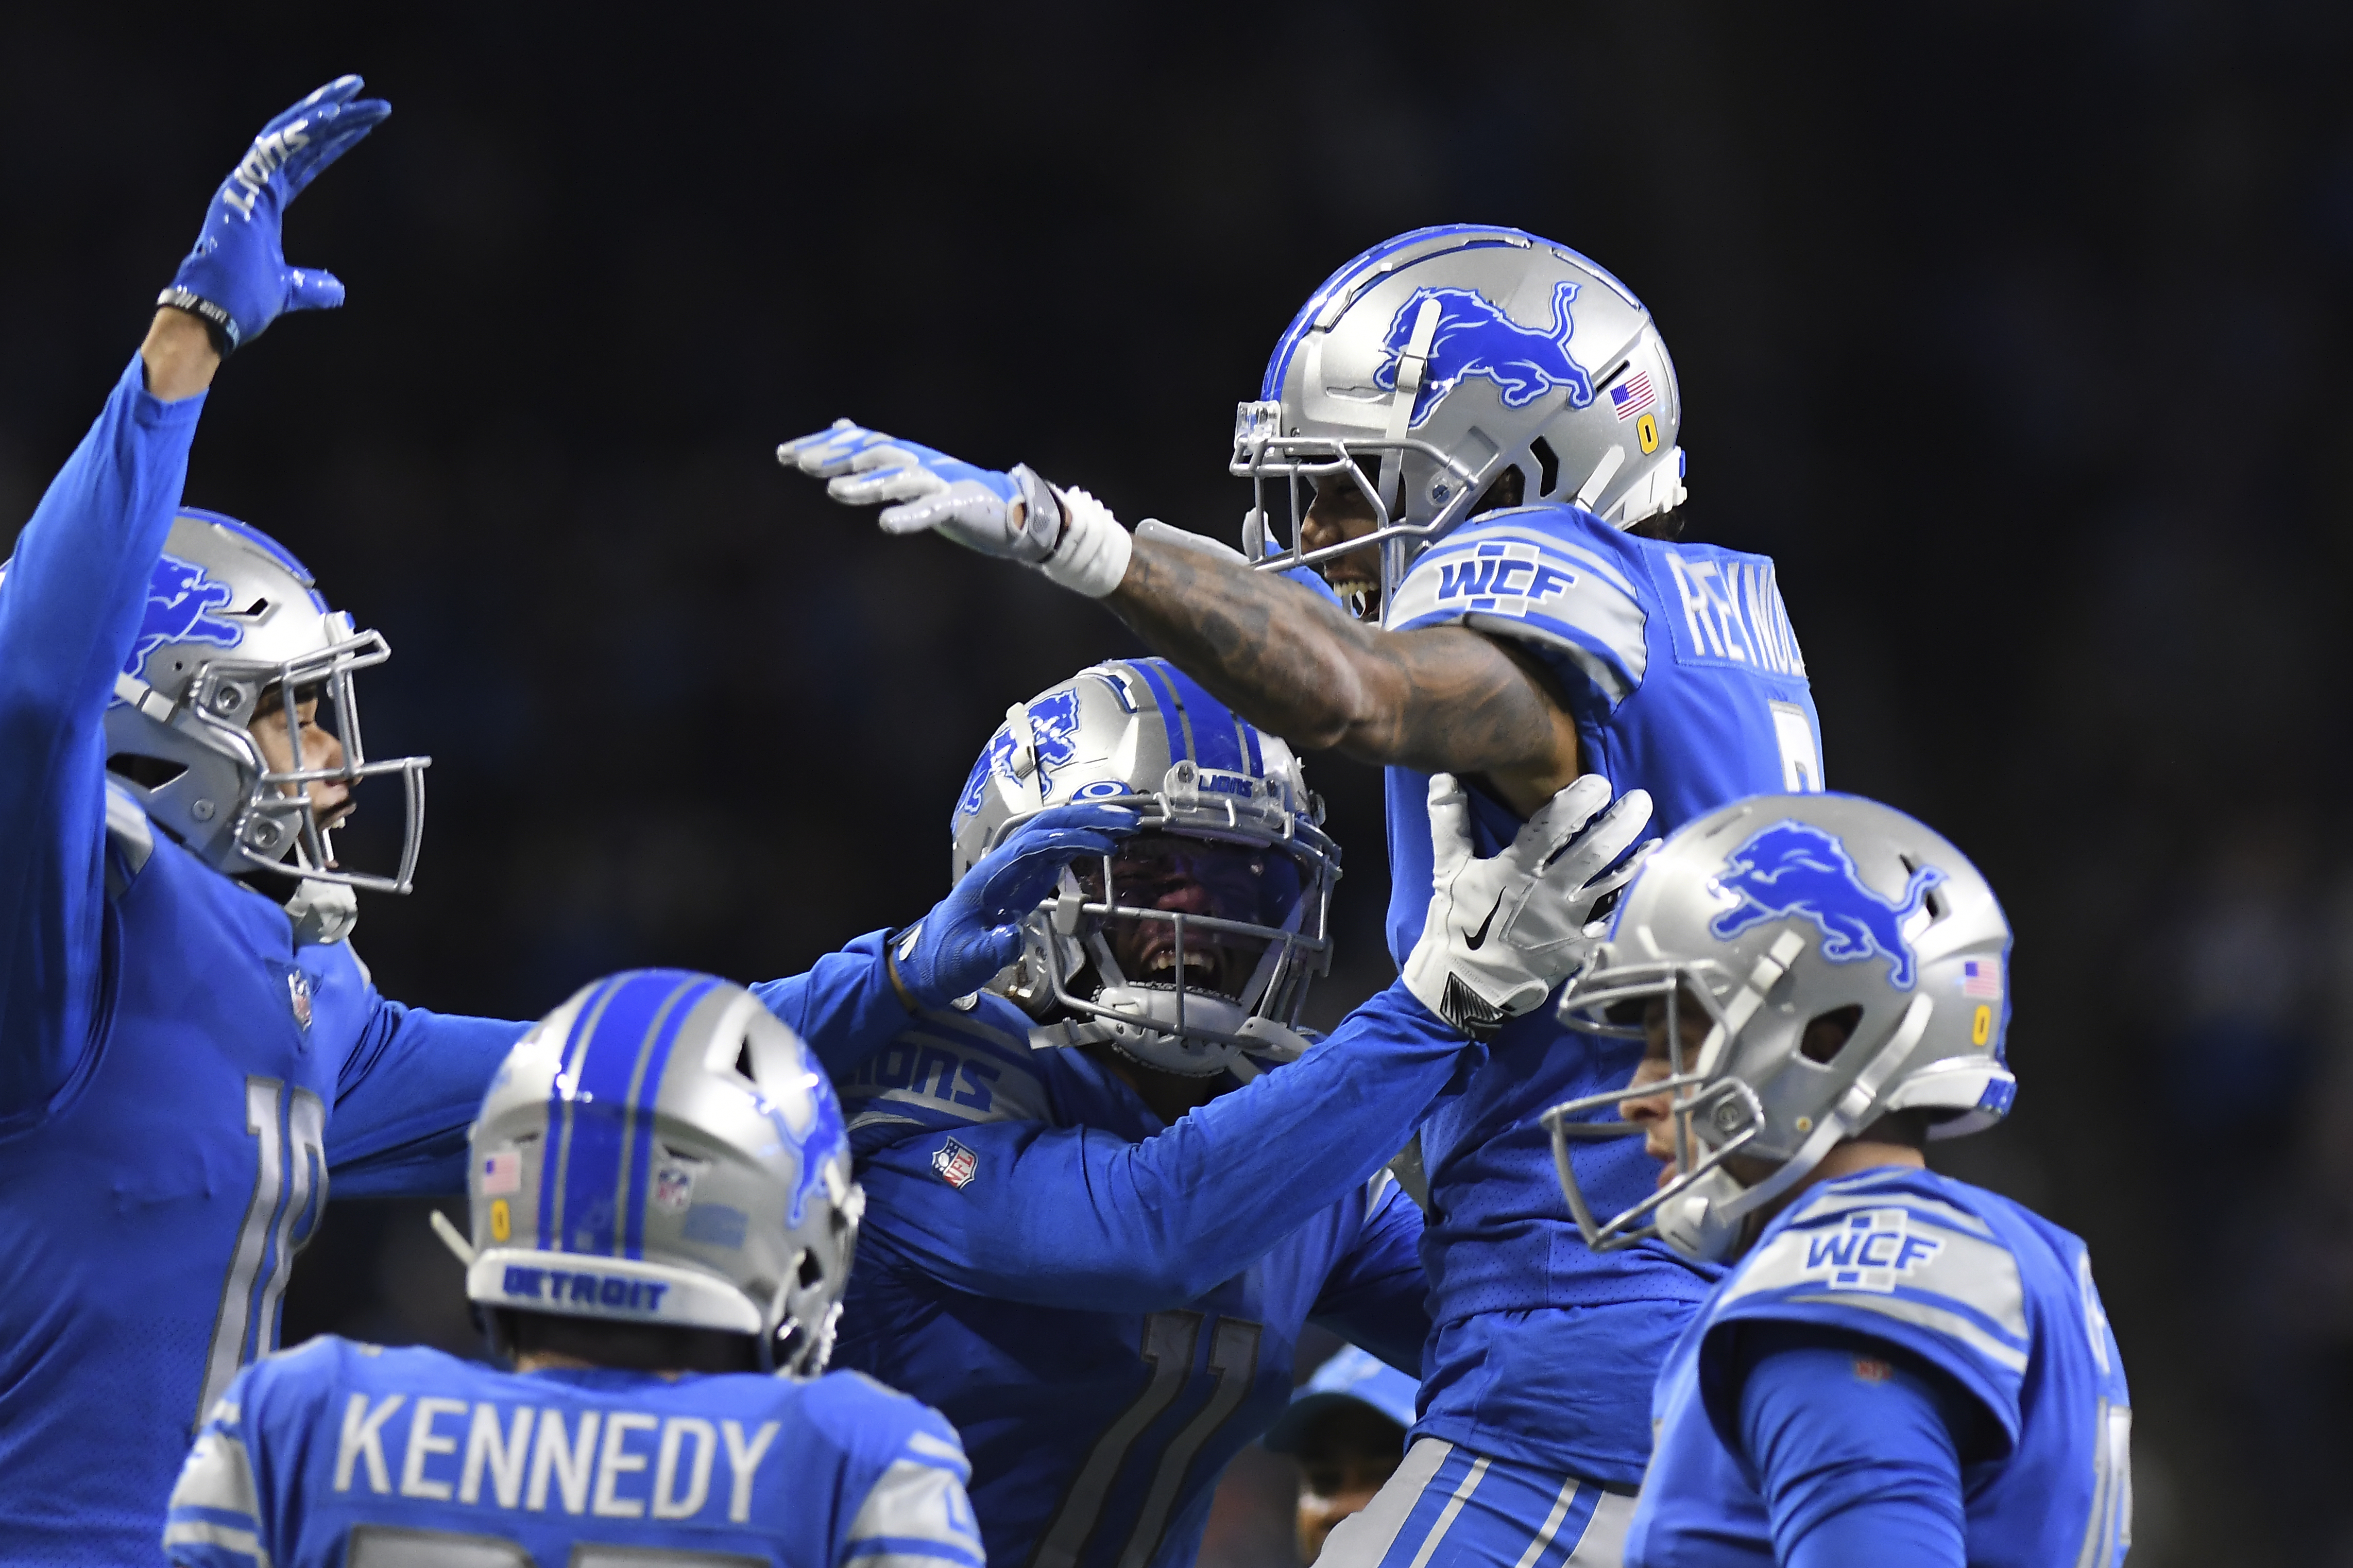 Packers vs. Lions, How to watch, stream & listen